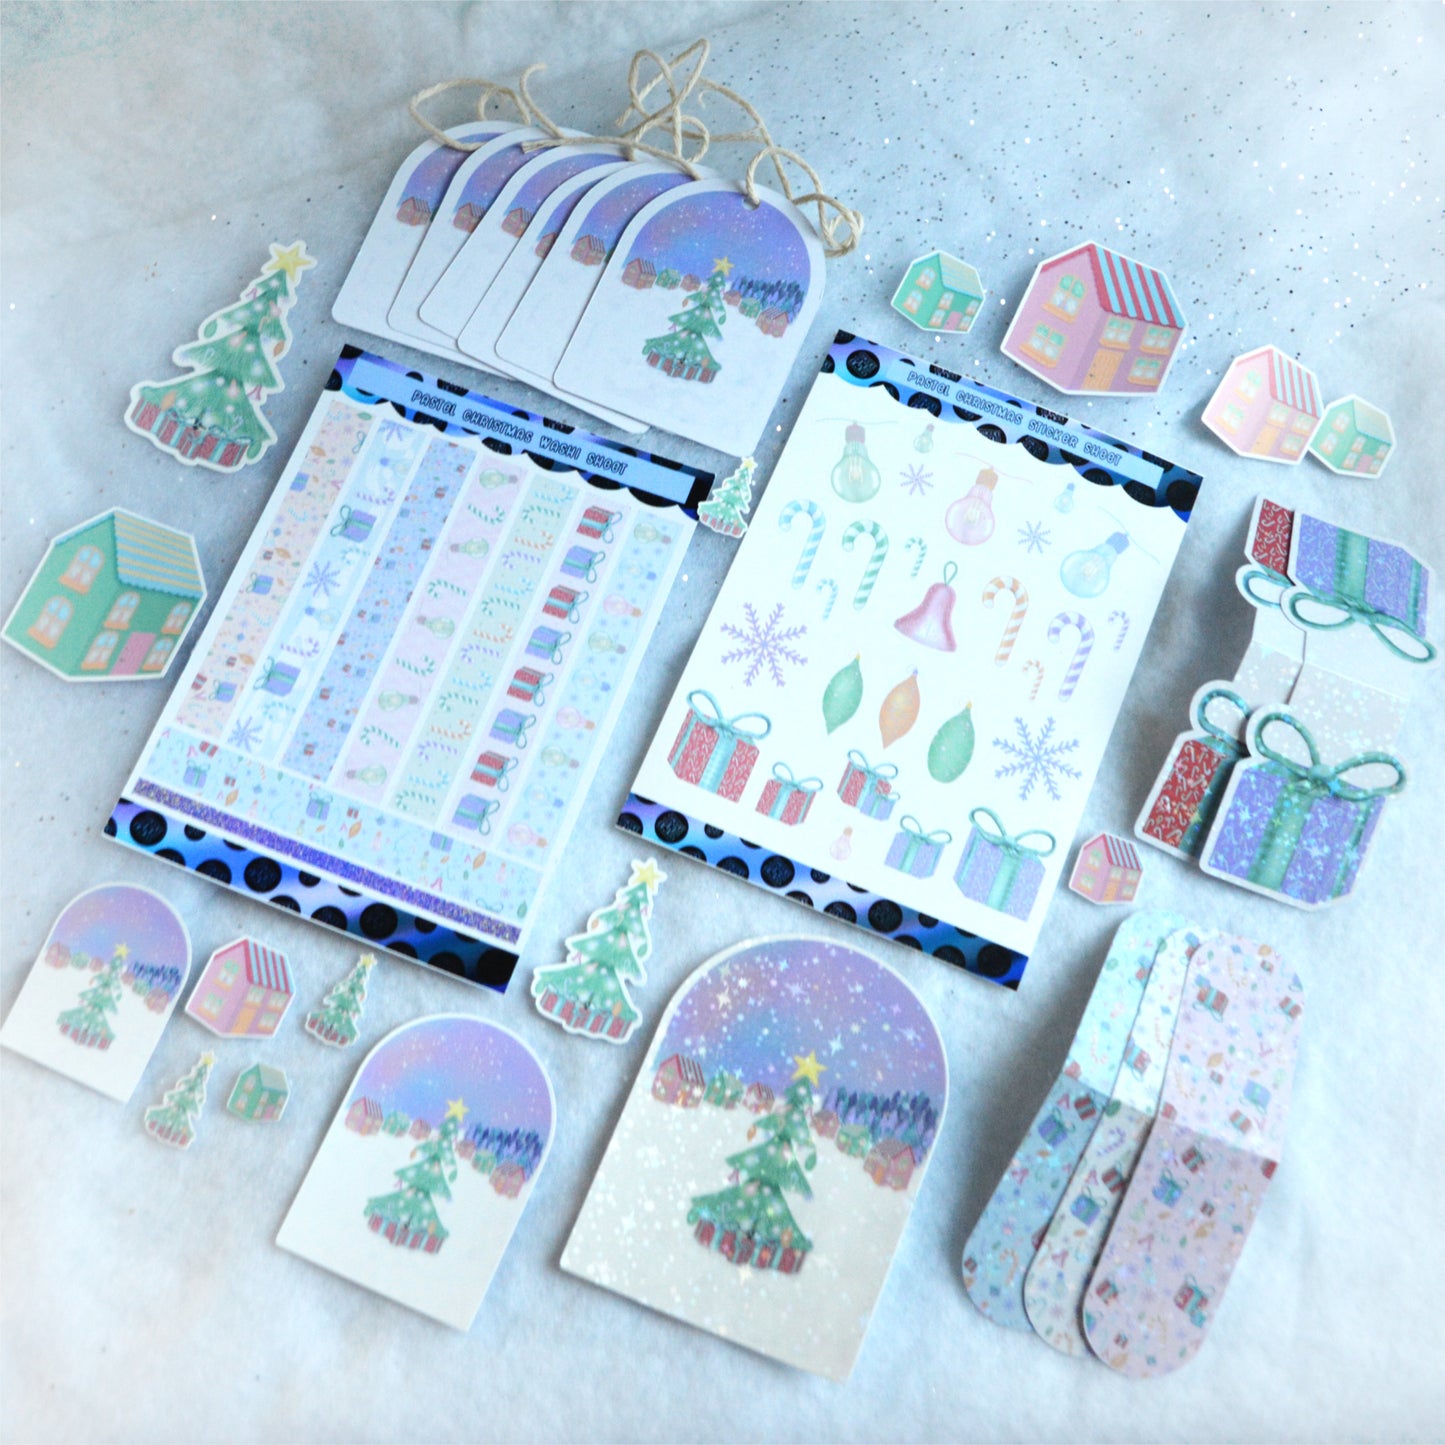 Christmas Collection - The Everything Set - bookmarks, sticker sheets, sticker set, die cut stickers, washi sheet